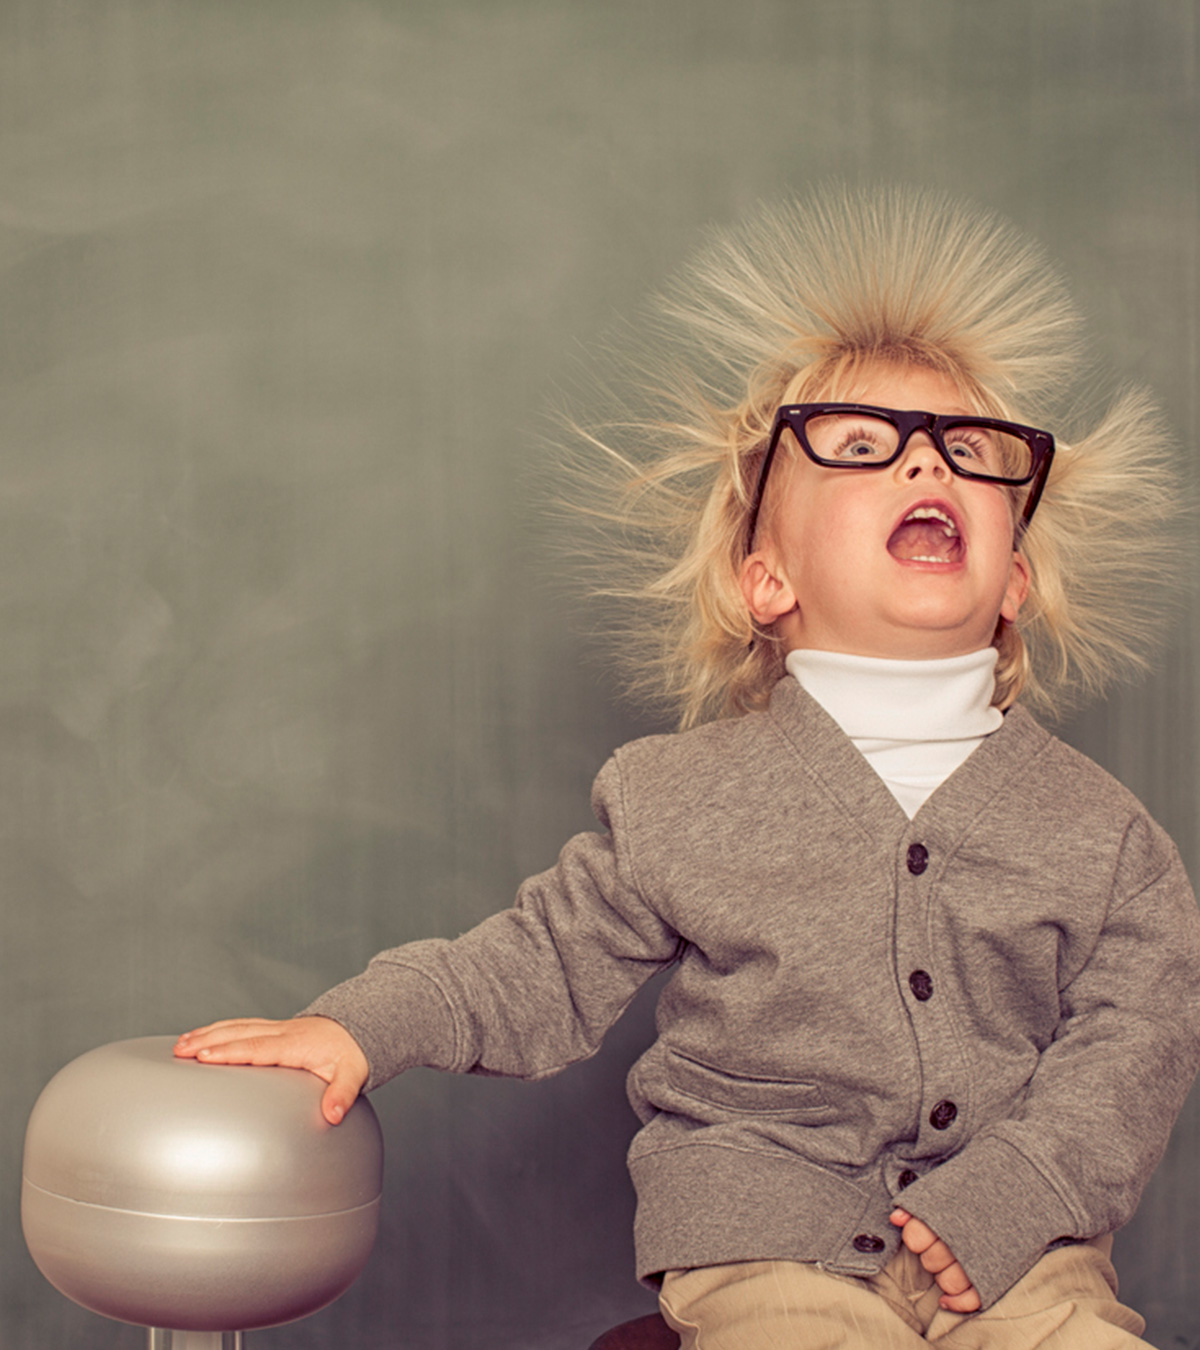 Static Electricity For Kids: What It Is, Facts And Uses